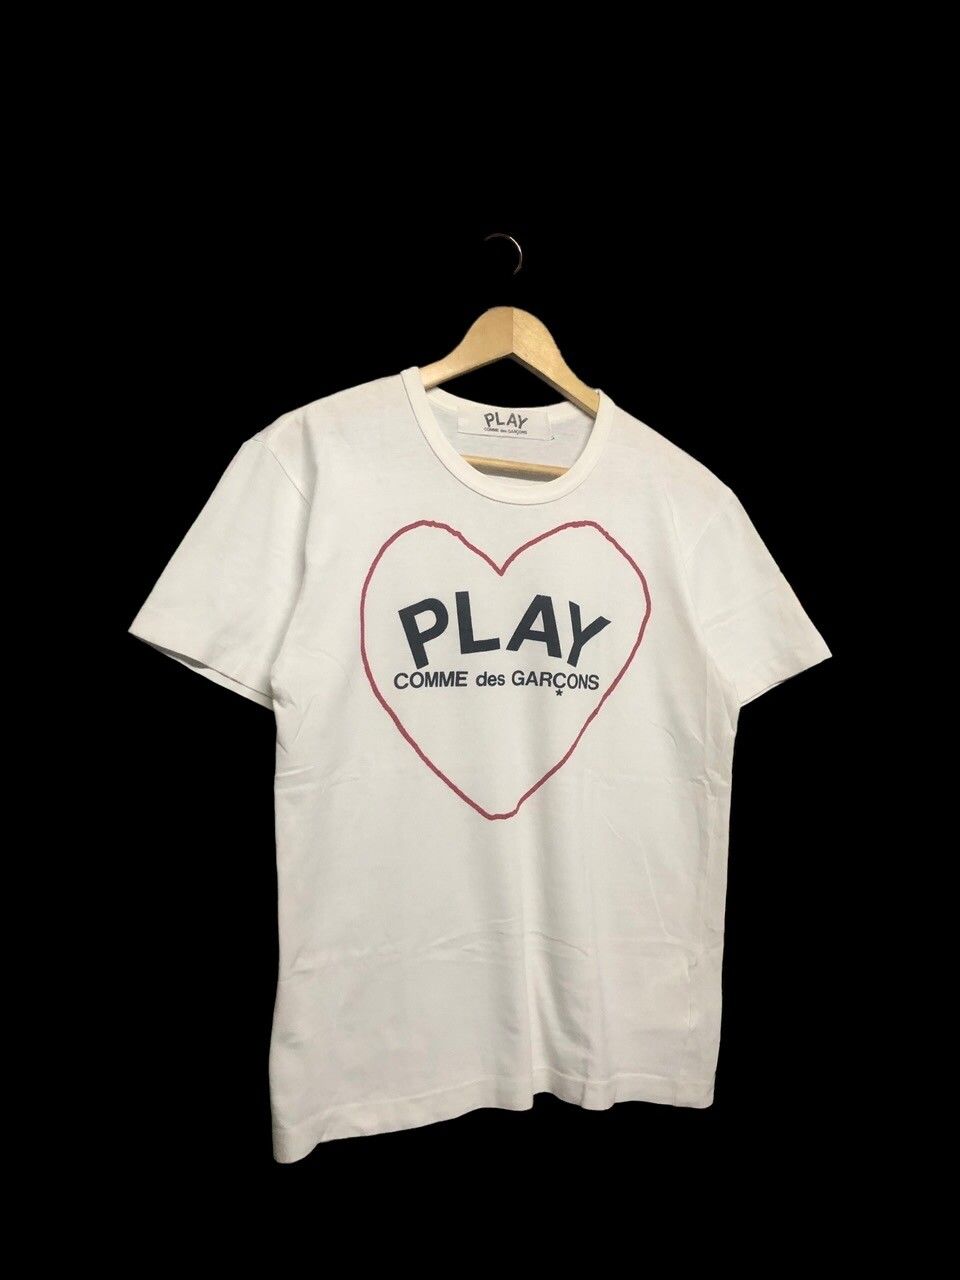 AD2005 Comme Des Garcons Play Tee - 3